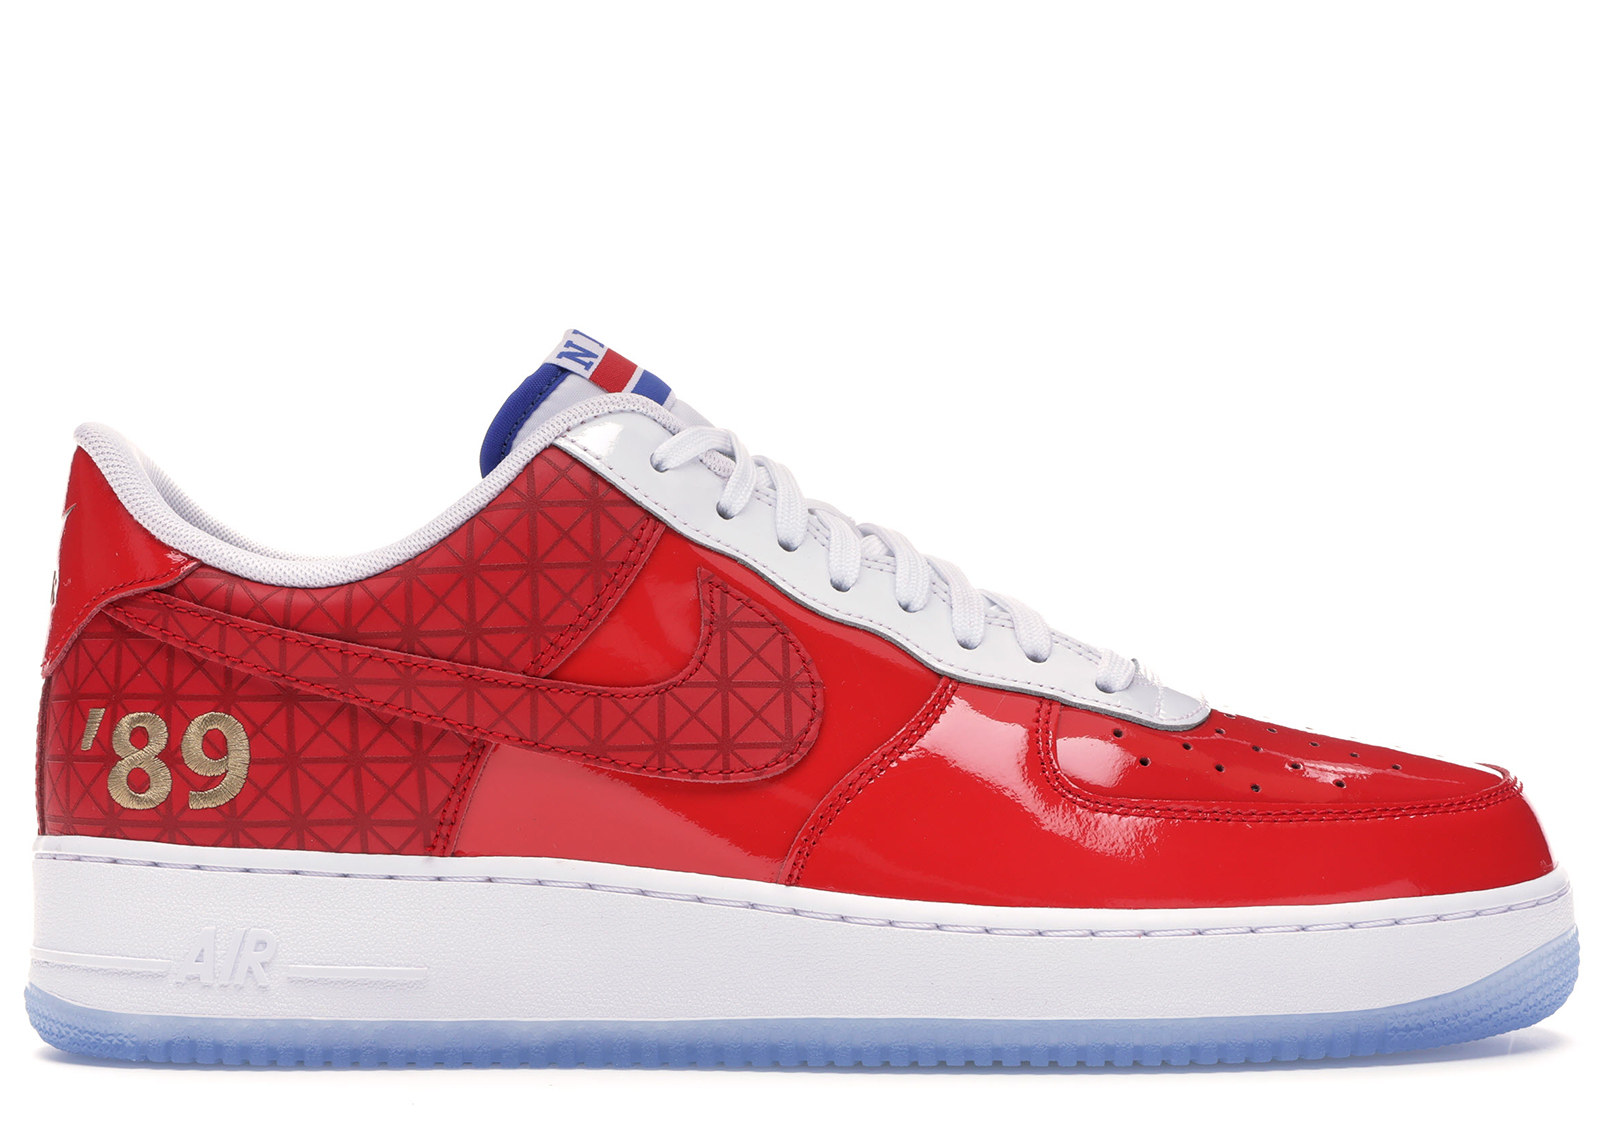 Nike Air Force 1 Low Detroit Pistons 89 